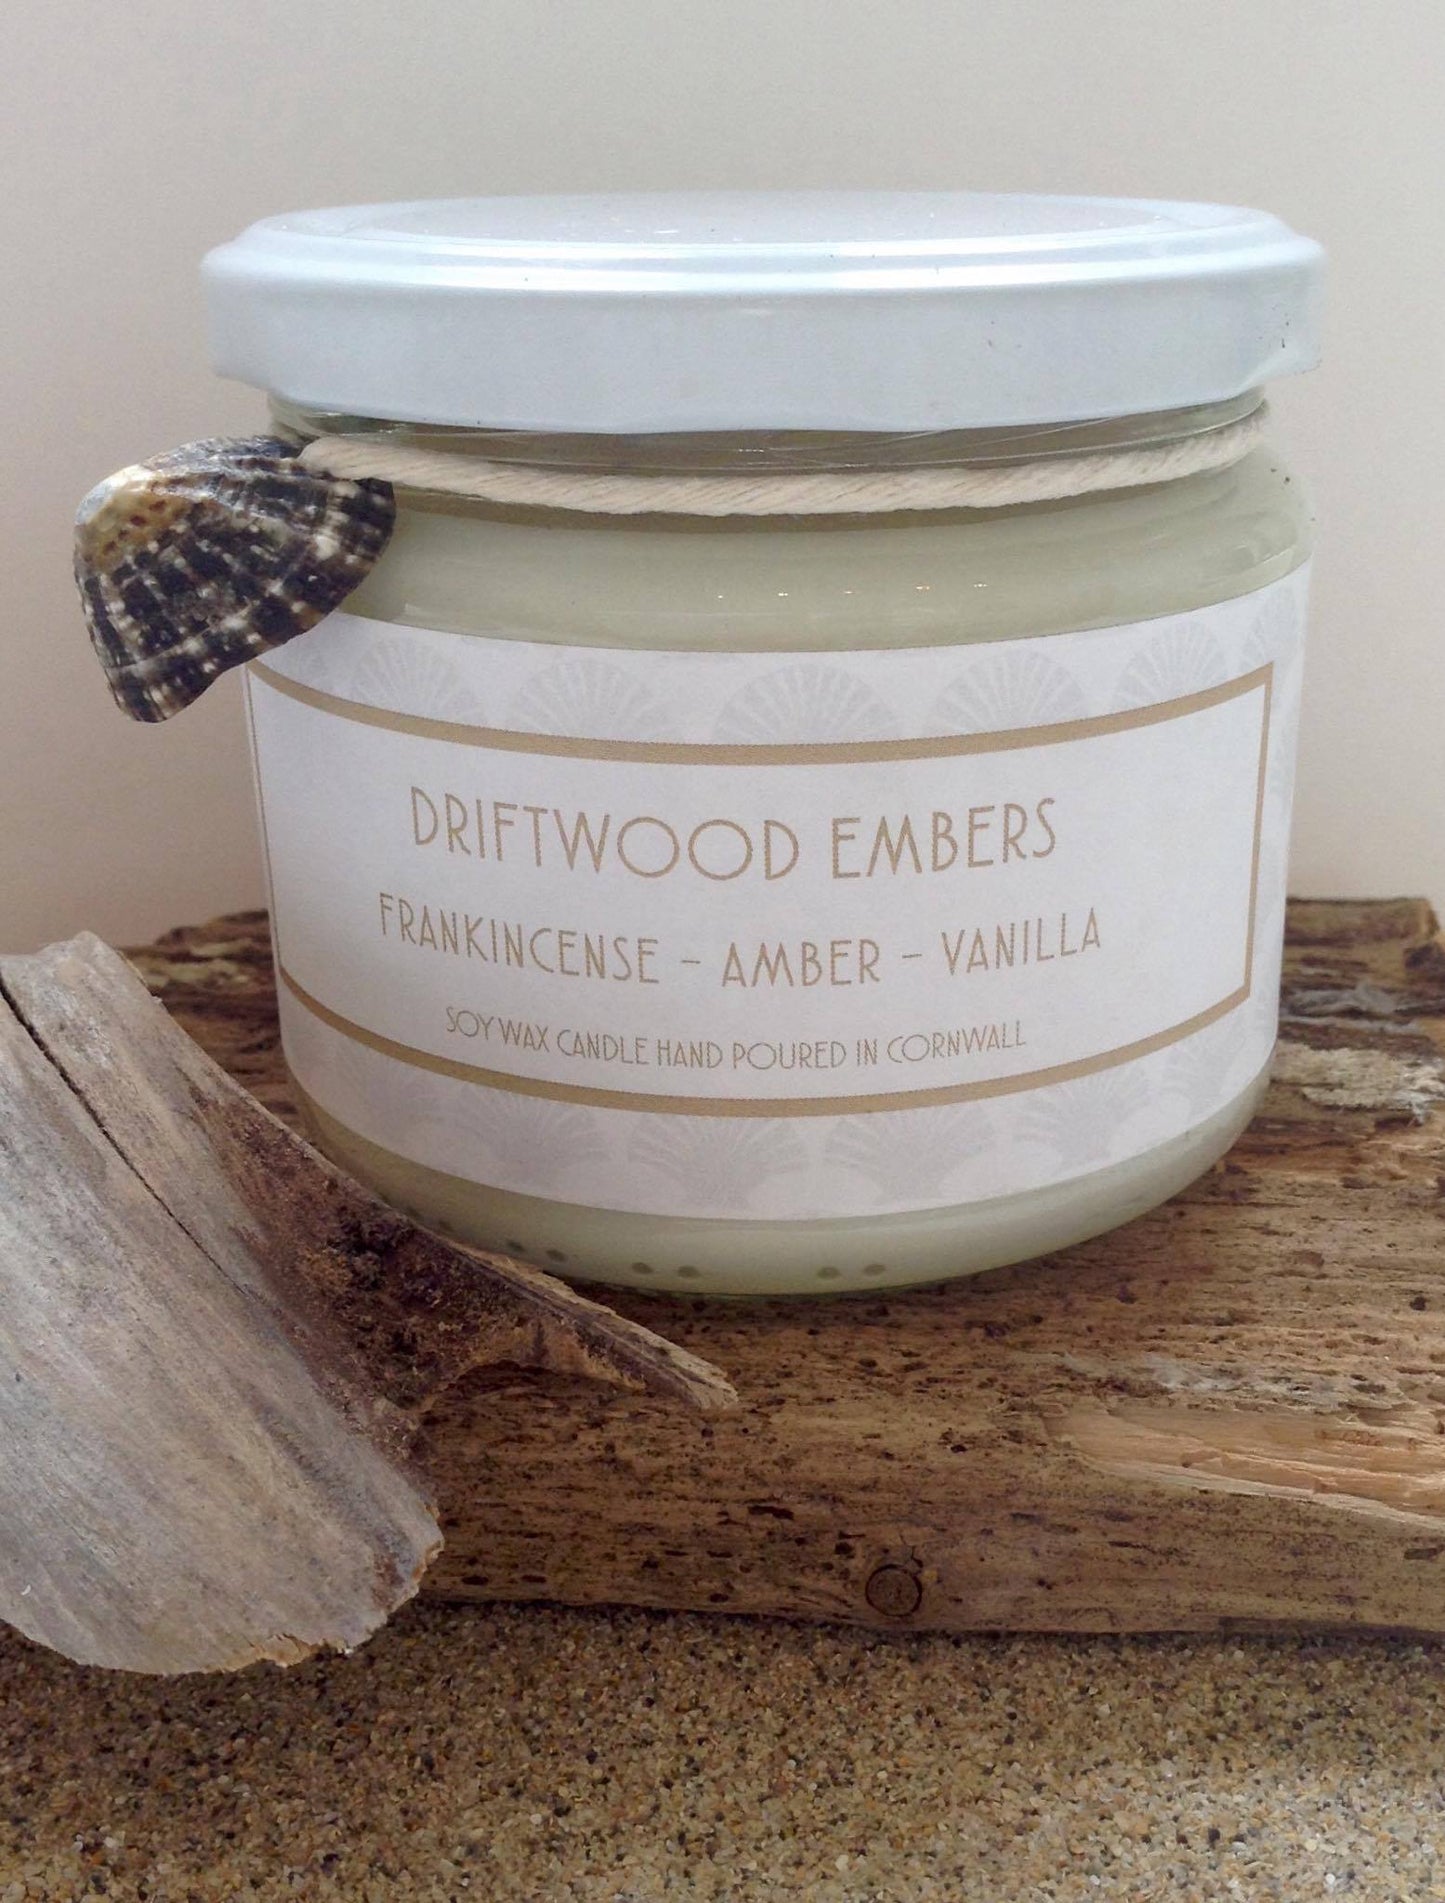 Driftwood Embers Candle  Frankincense - Amber - Vanilla  &nbsp;£20  Citrus top notes lead to a heart of musky spices resting on a warm vanilla base  Ingredients: natural plant wax, fragrance oils  Shell may vary to image shown  &nbsp;Double wicked plant wax candle . Burns for approx 40 hours. Made in Cornwall by Seawitch Candles  " Cosy and comforting with a hint of smokiness. We have bought 6 and counting! Our favourite candle ever." - Joe and Deb